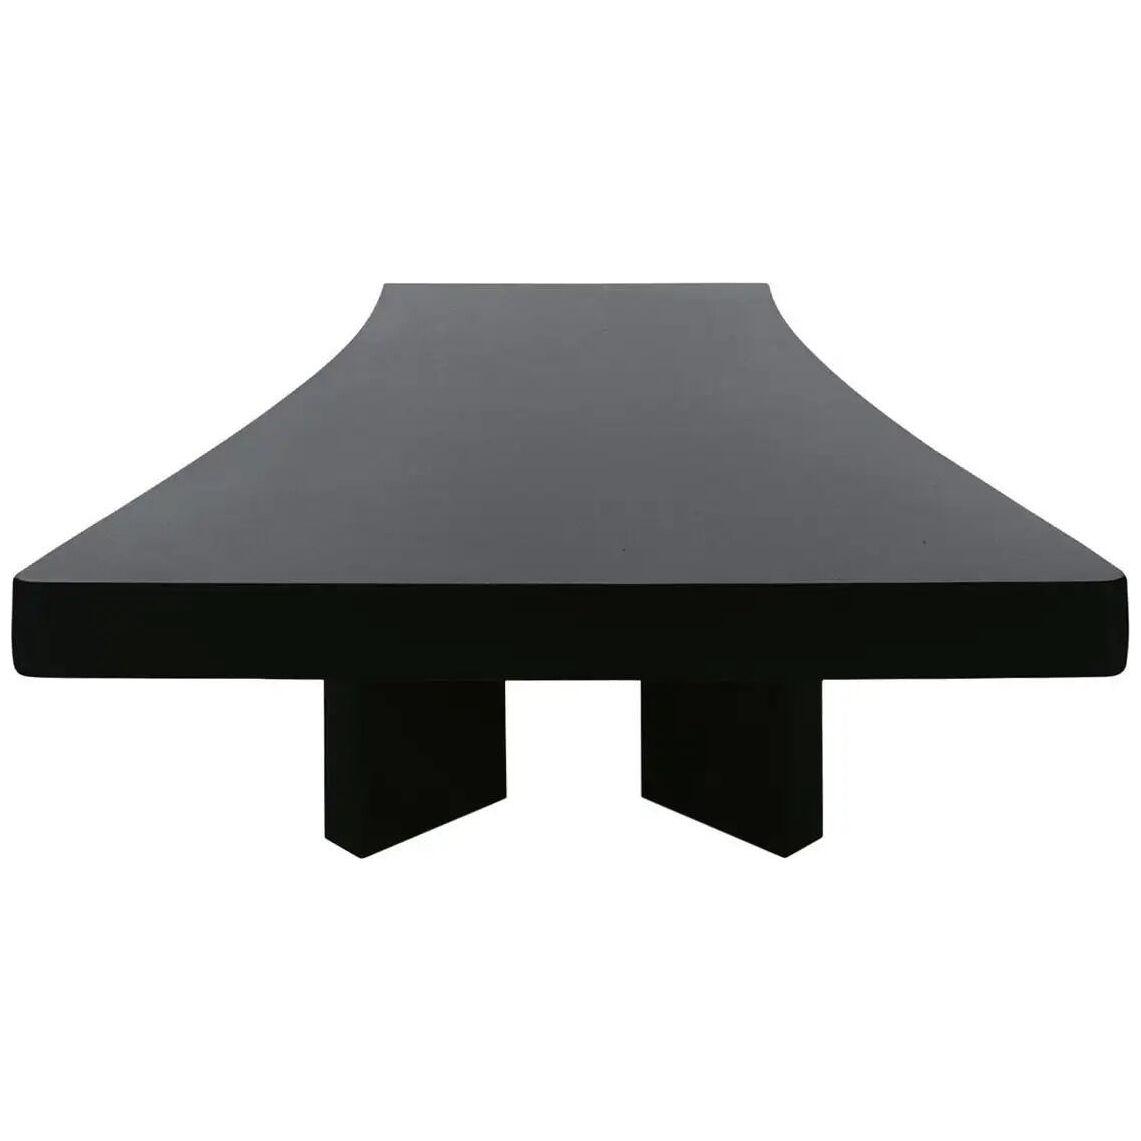 Charlotte Perriand 515 Plana Coffee Table, Black Stained Wood by Cassina